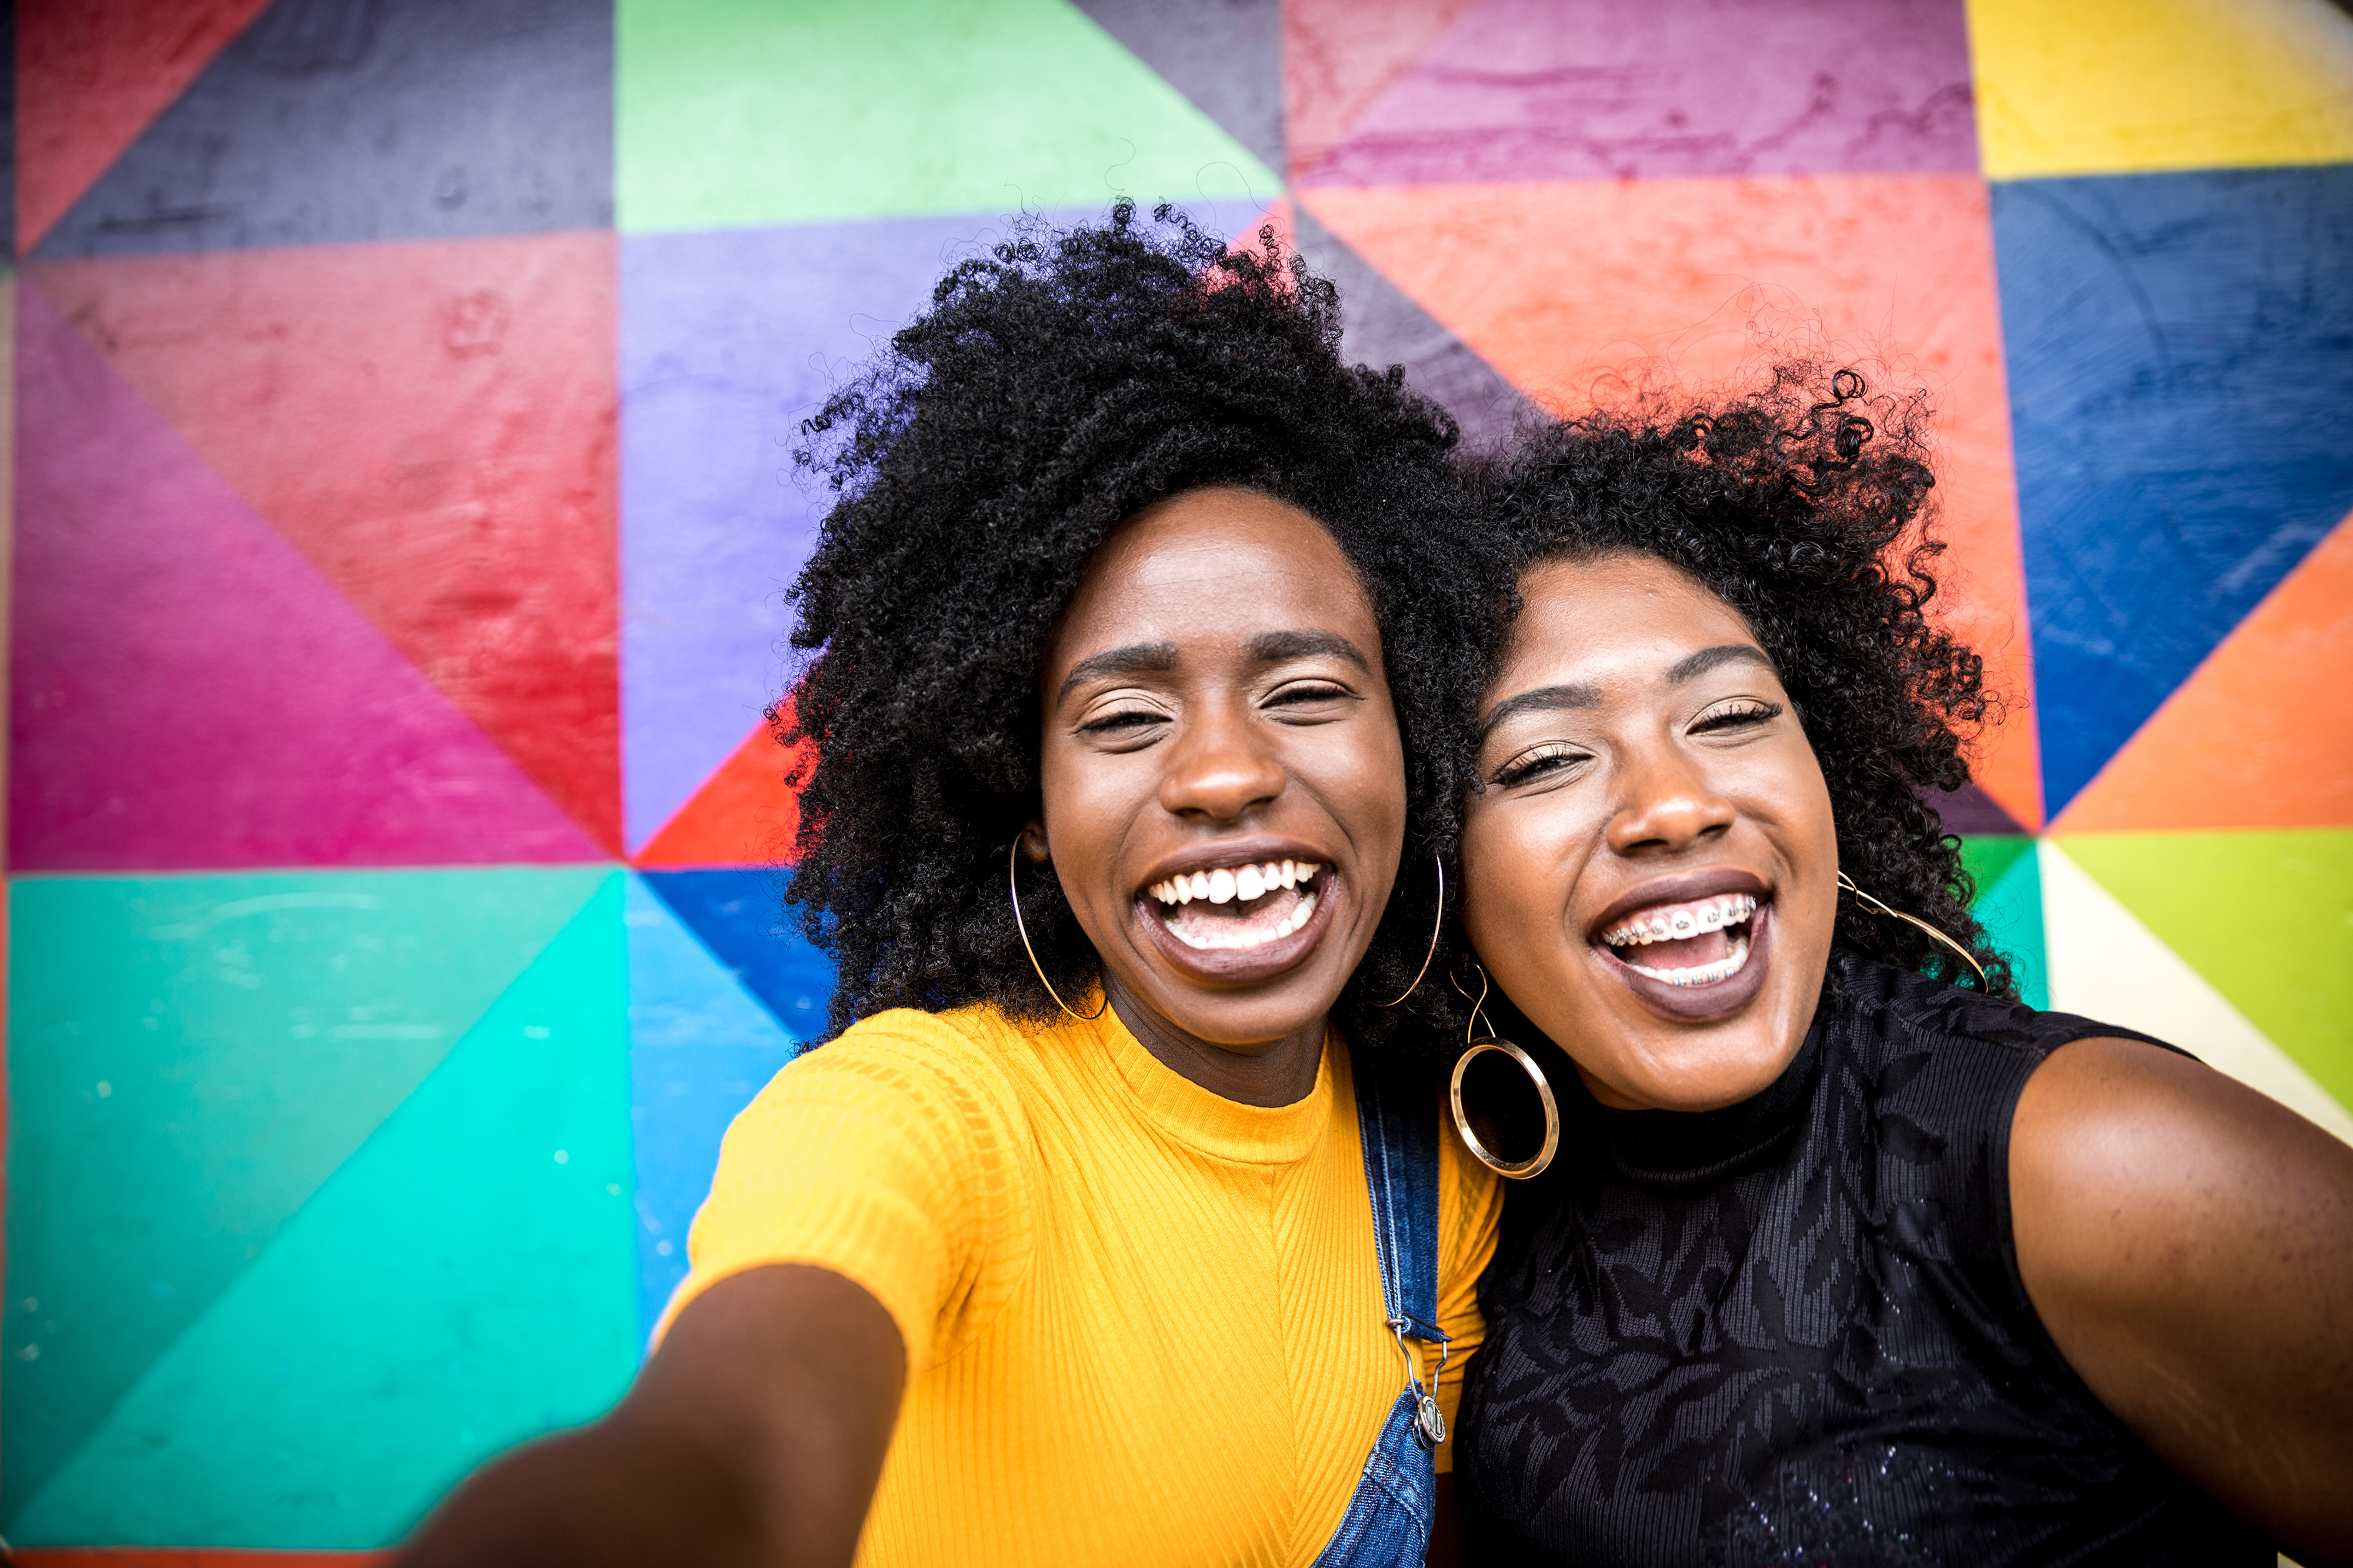 Two people smiling for the camera in front of a colorful fractal backdrop